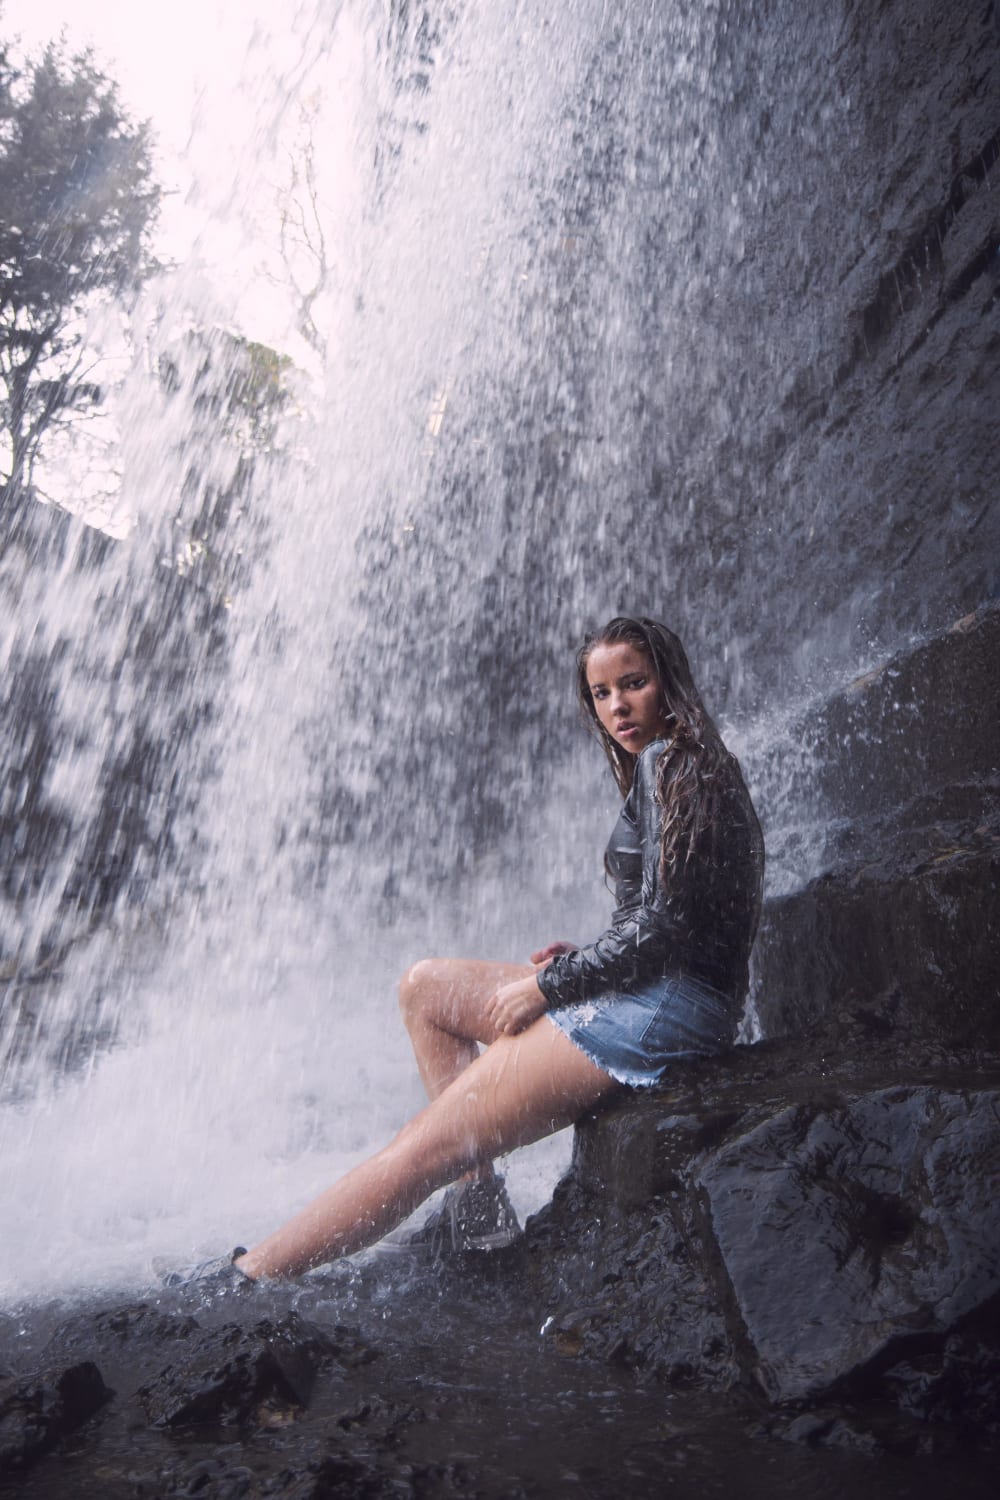 I found this photo deep in my old hard drive- a photo of my friend in high school at a waterfall in Dallas, Tx.